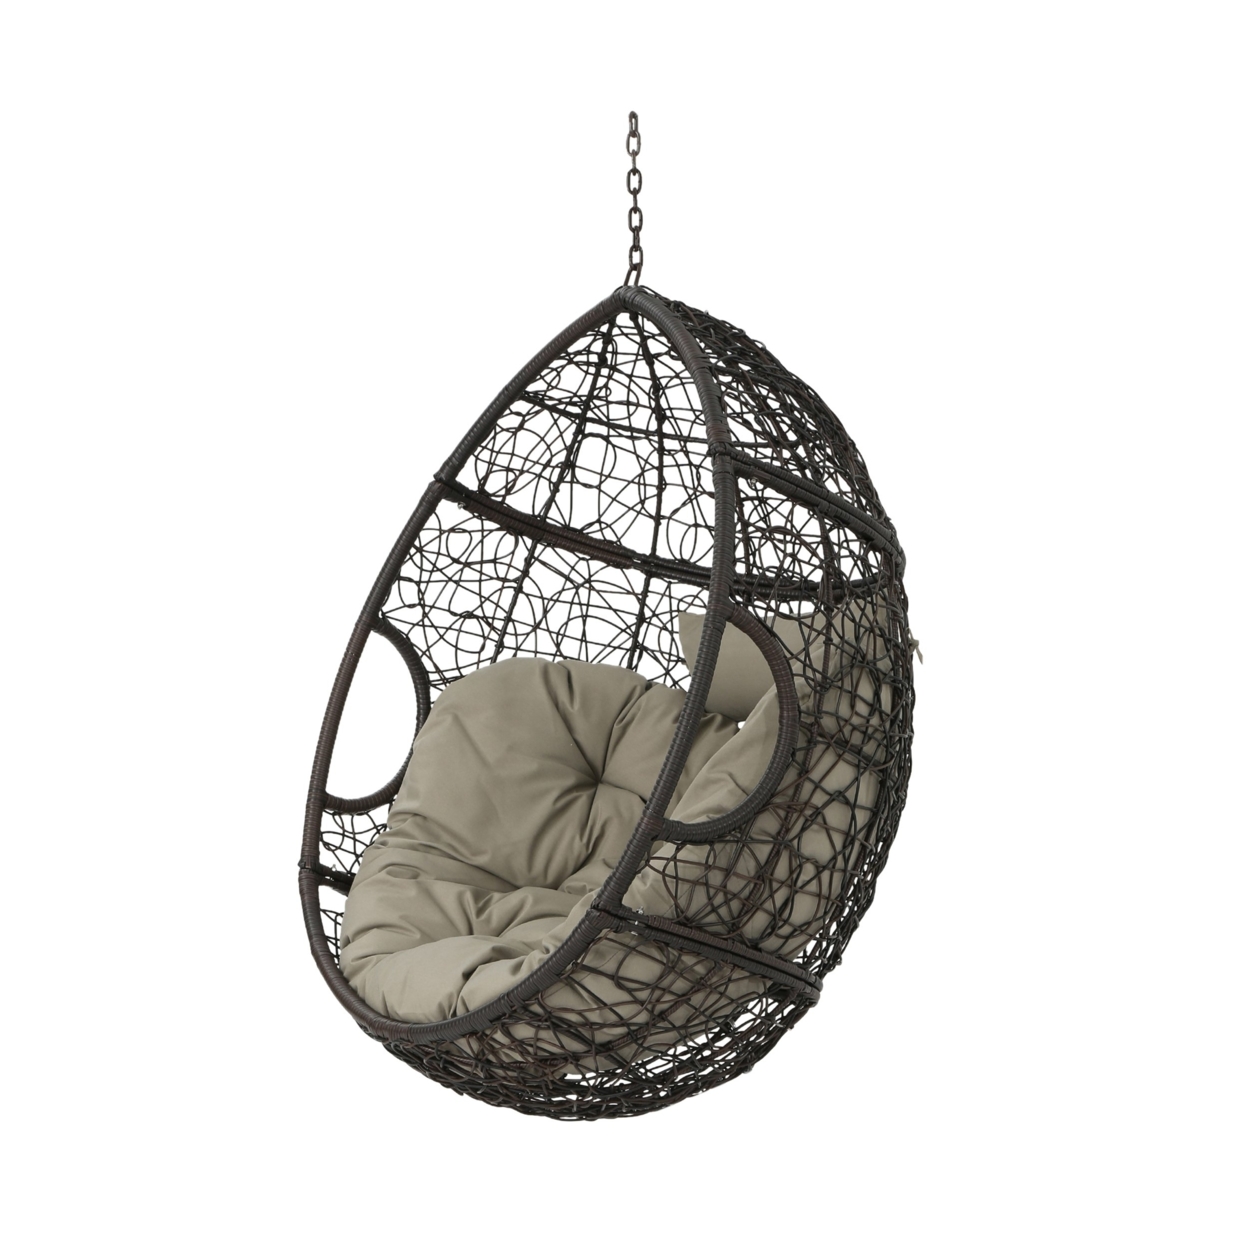 Yosiyah Indoor/Outdoor Hanging Teardrop / Egg Chair (Stand Not Included) - Multi-brown/khaki